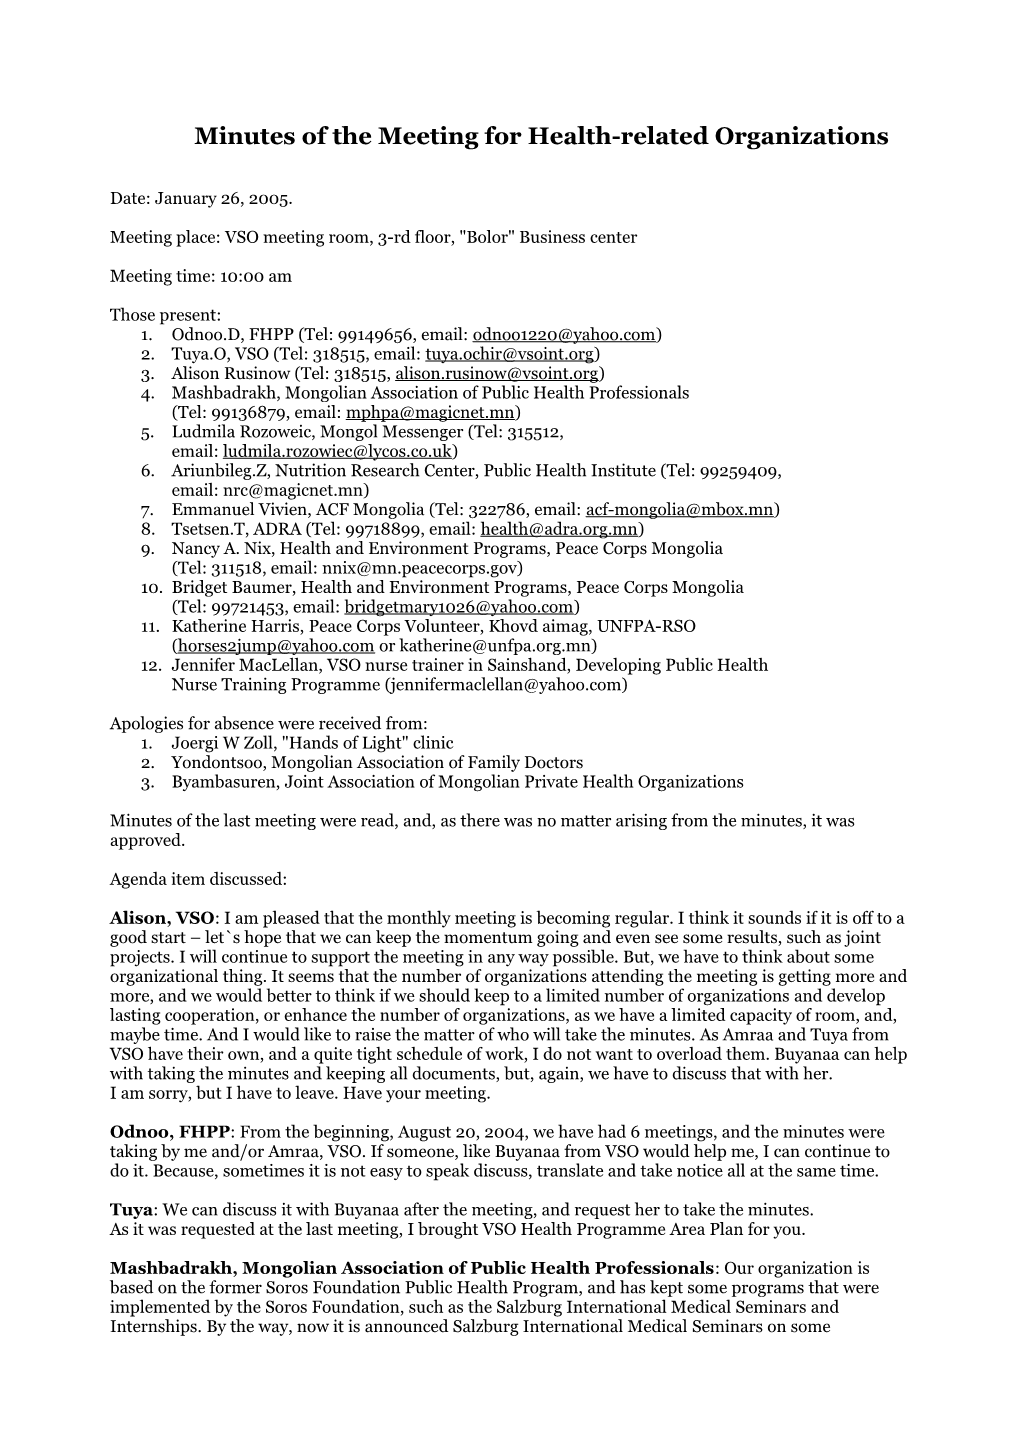 Minutes of the Meeting for Health-Related Organizations